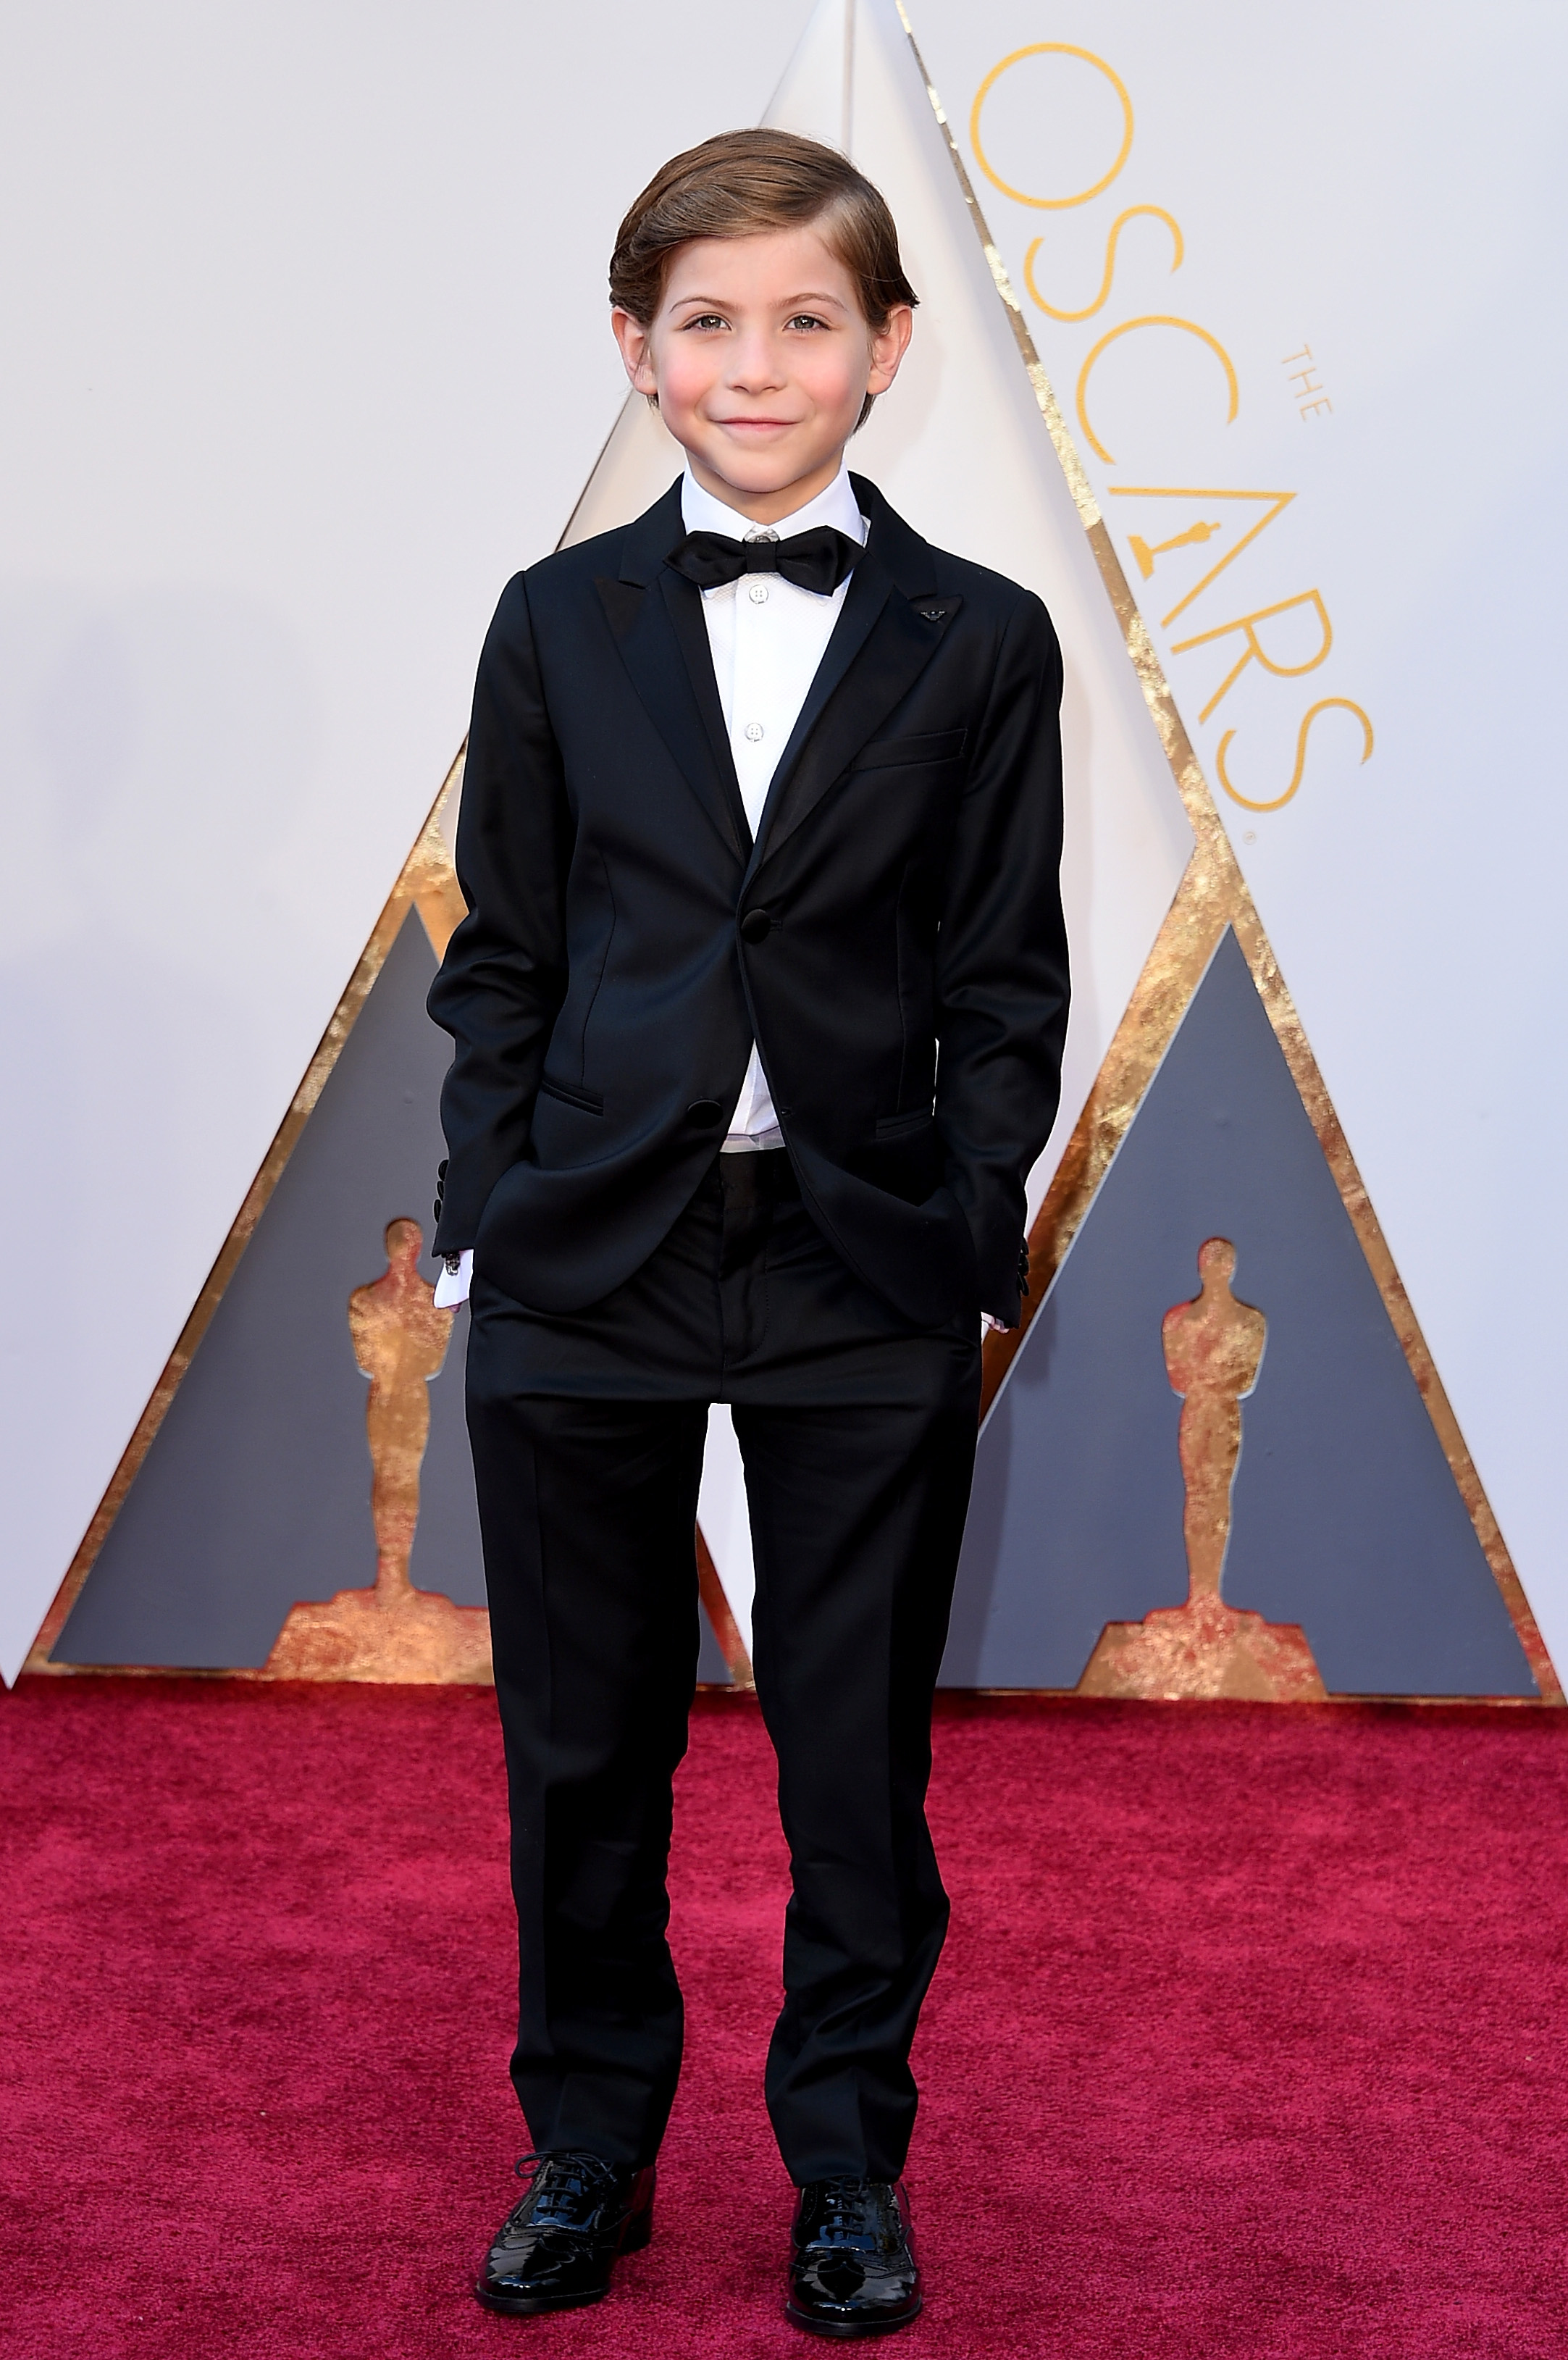 Jacob Tremblay attends the 88th Annual Academy Awards on Feb. 28, 2016 in Hollywood, Calif.